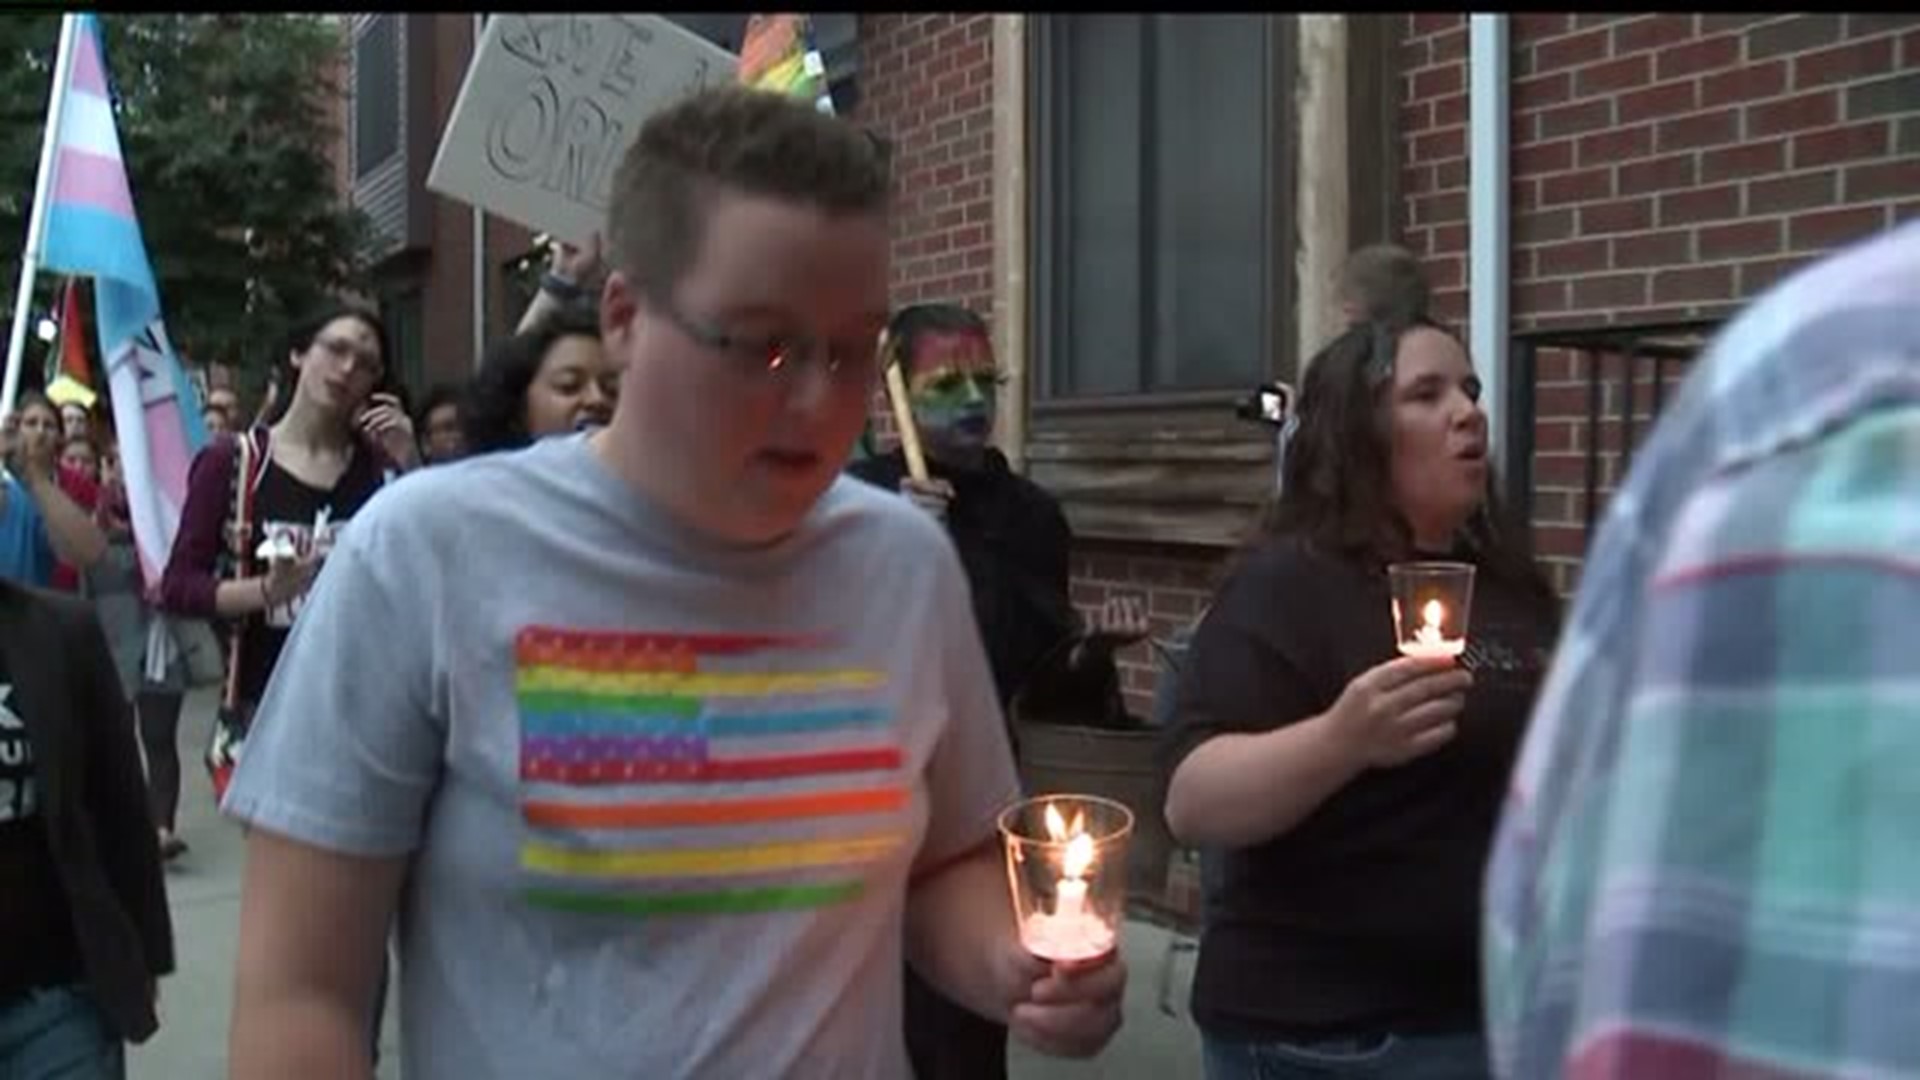 Hundreds remember victims of Orlando nightclub shooting in Harrisburg